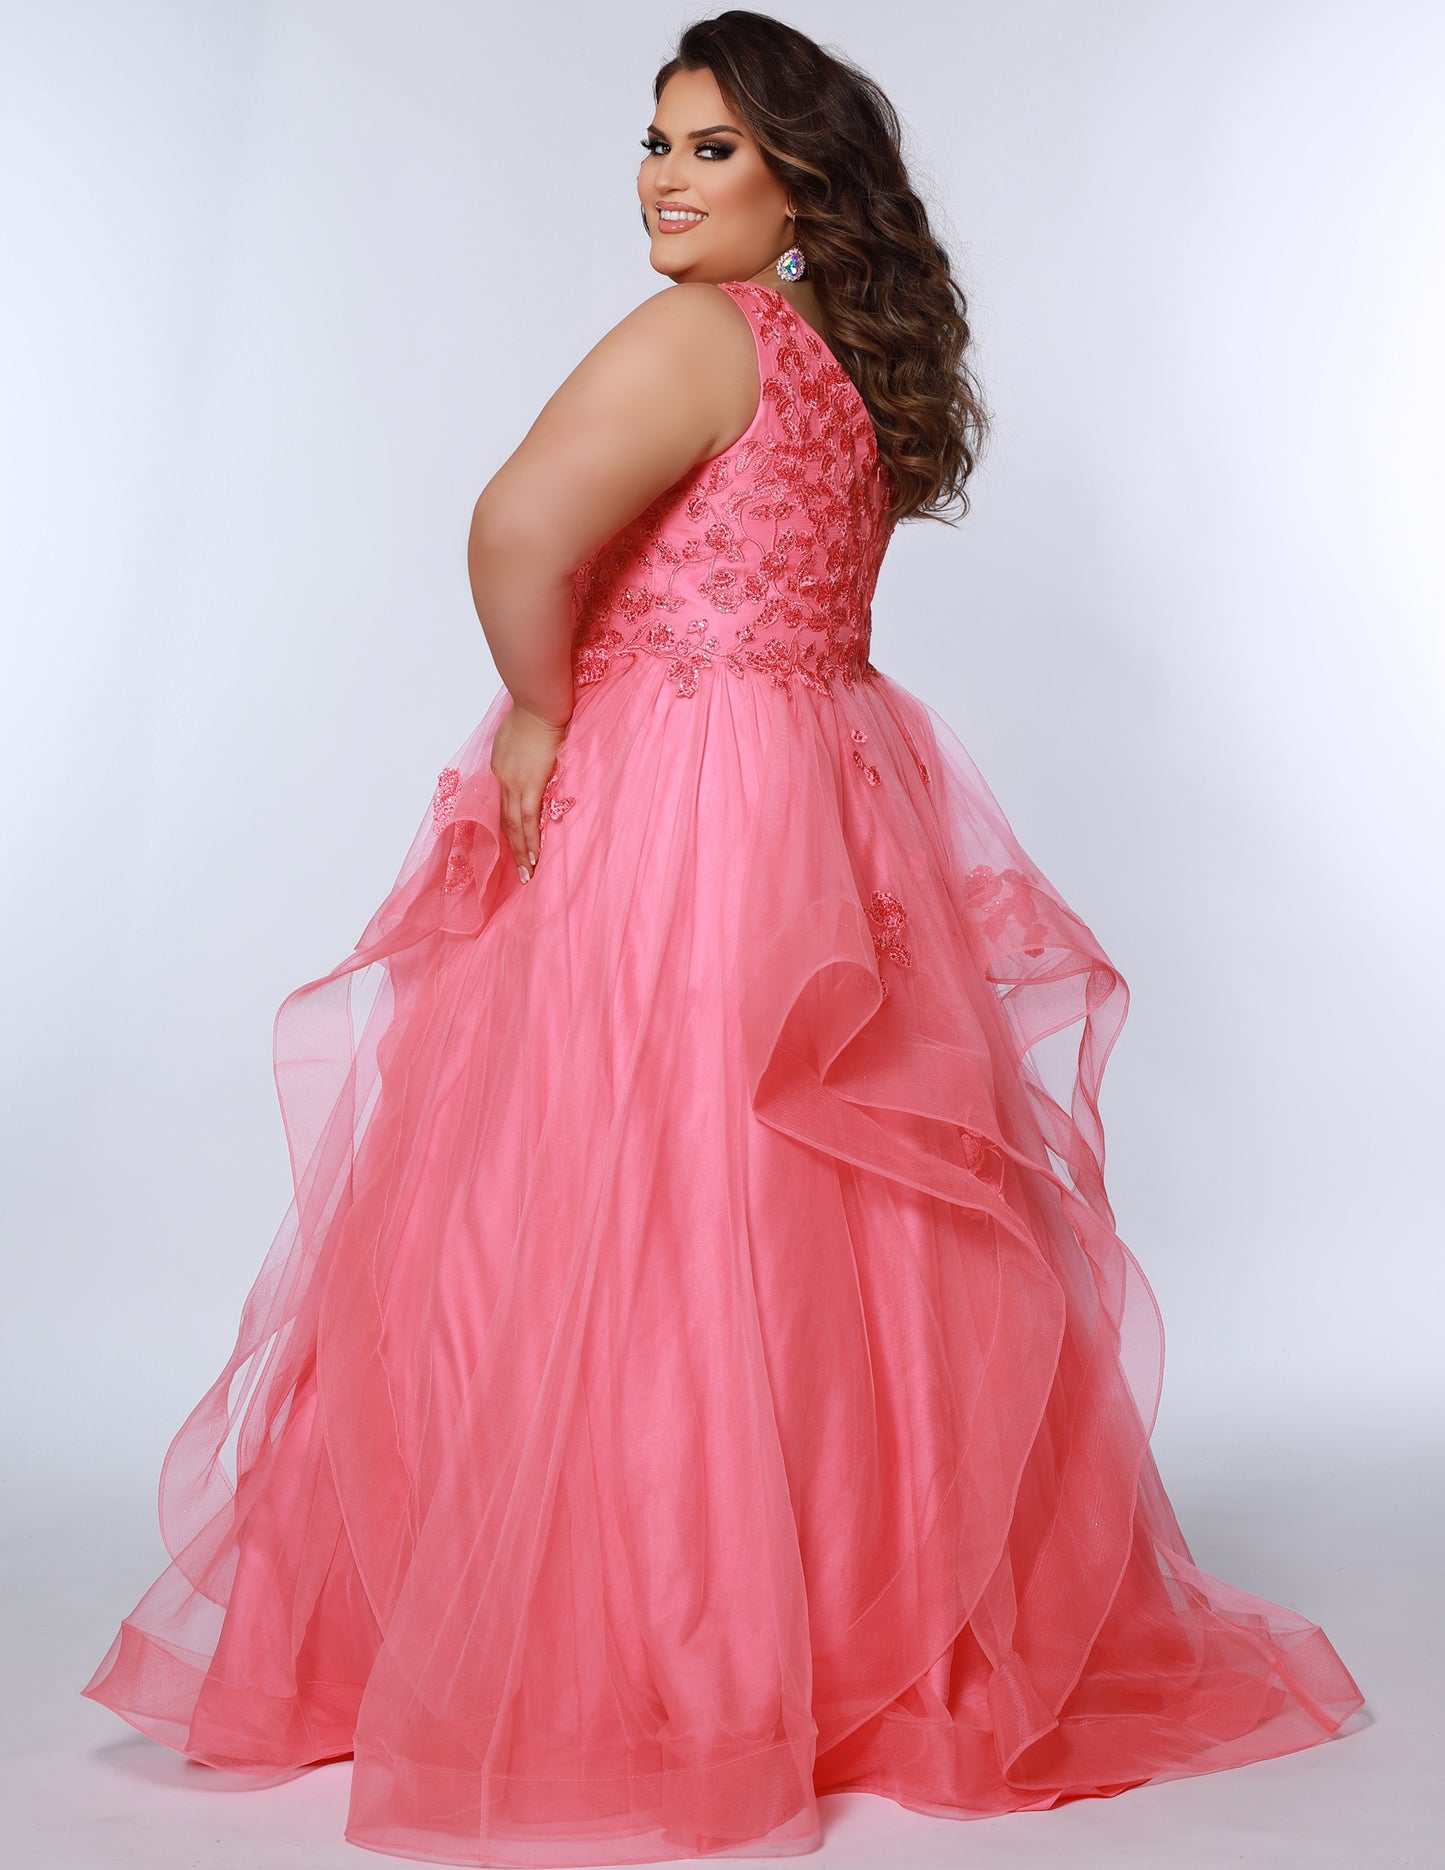 For a lasting impression at prom, the Sydney's Closet SC7347 Floral Lace Bodice dress offers timeless elegance with its layered tulle ballgown skirt and tonal mesh insert. The V-neckline and bra-friendly straps deliver a flattering fit, while the natural waistline and horsehair hem ensure a stylish finish.